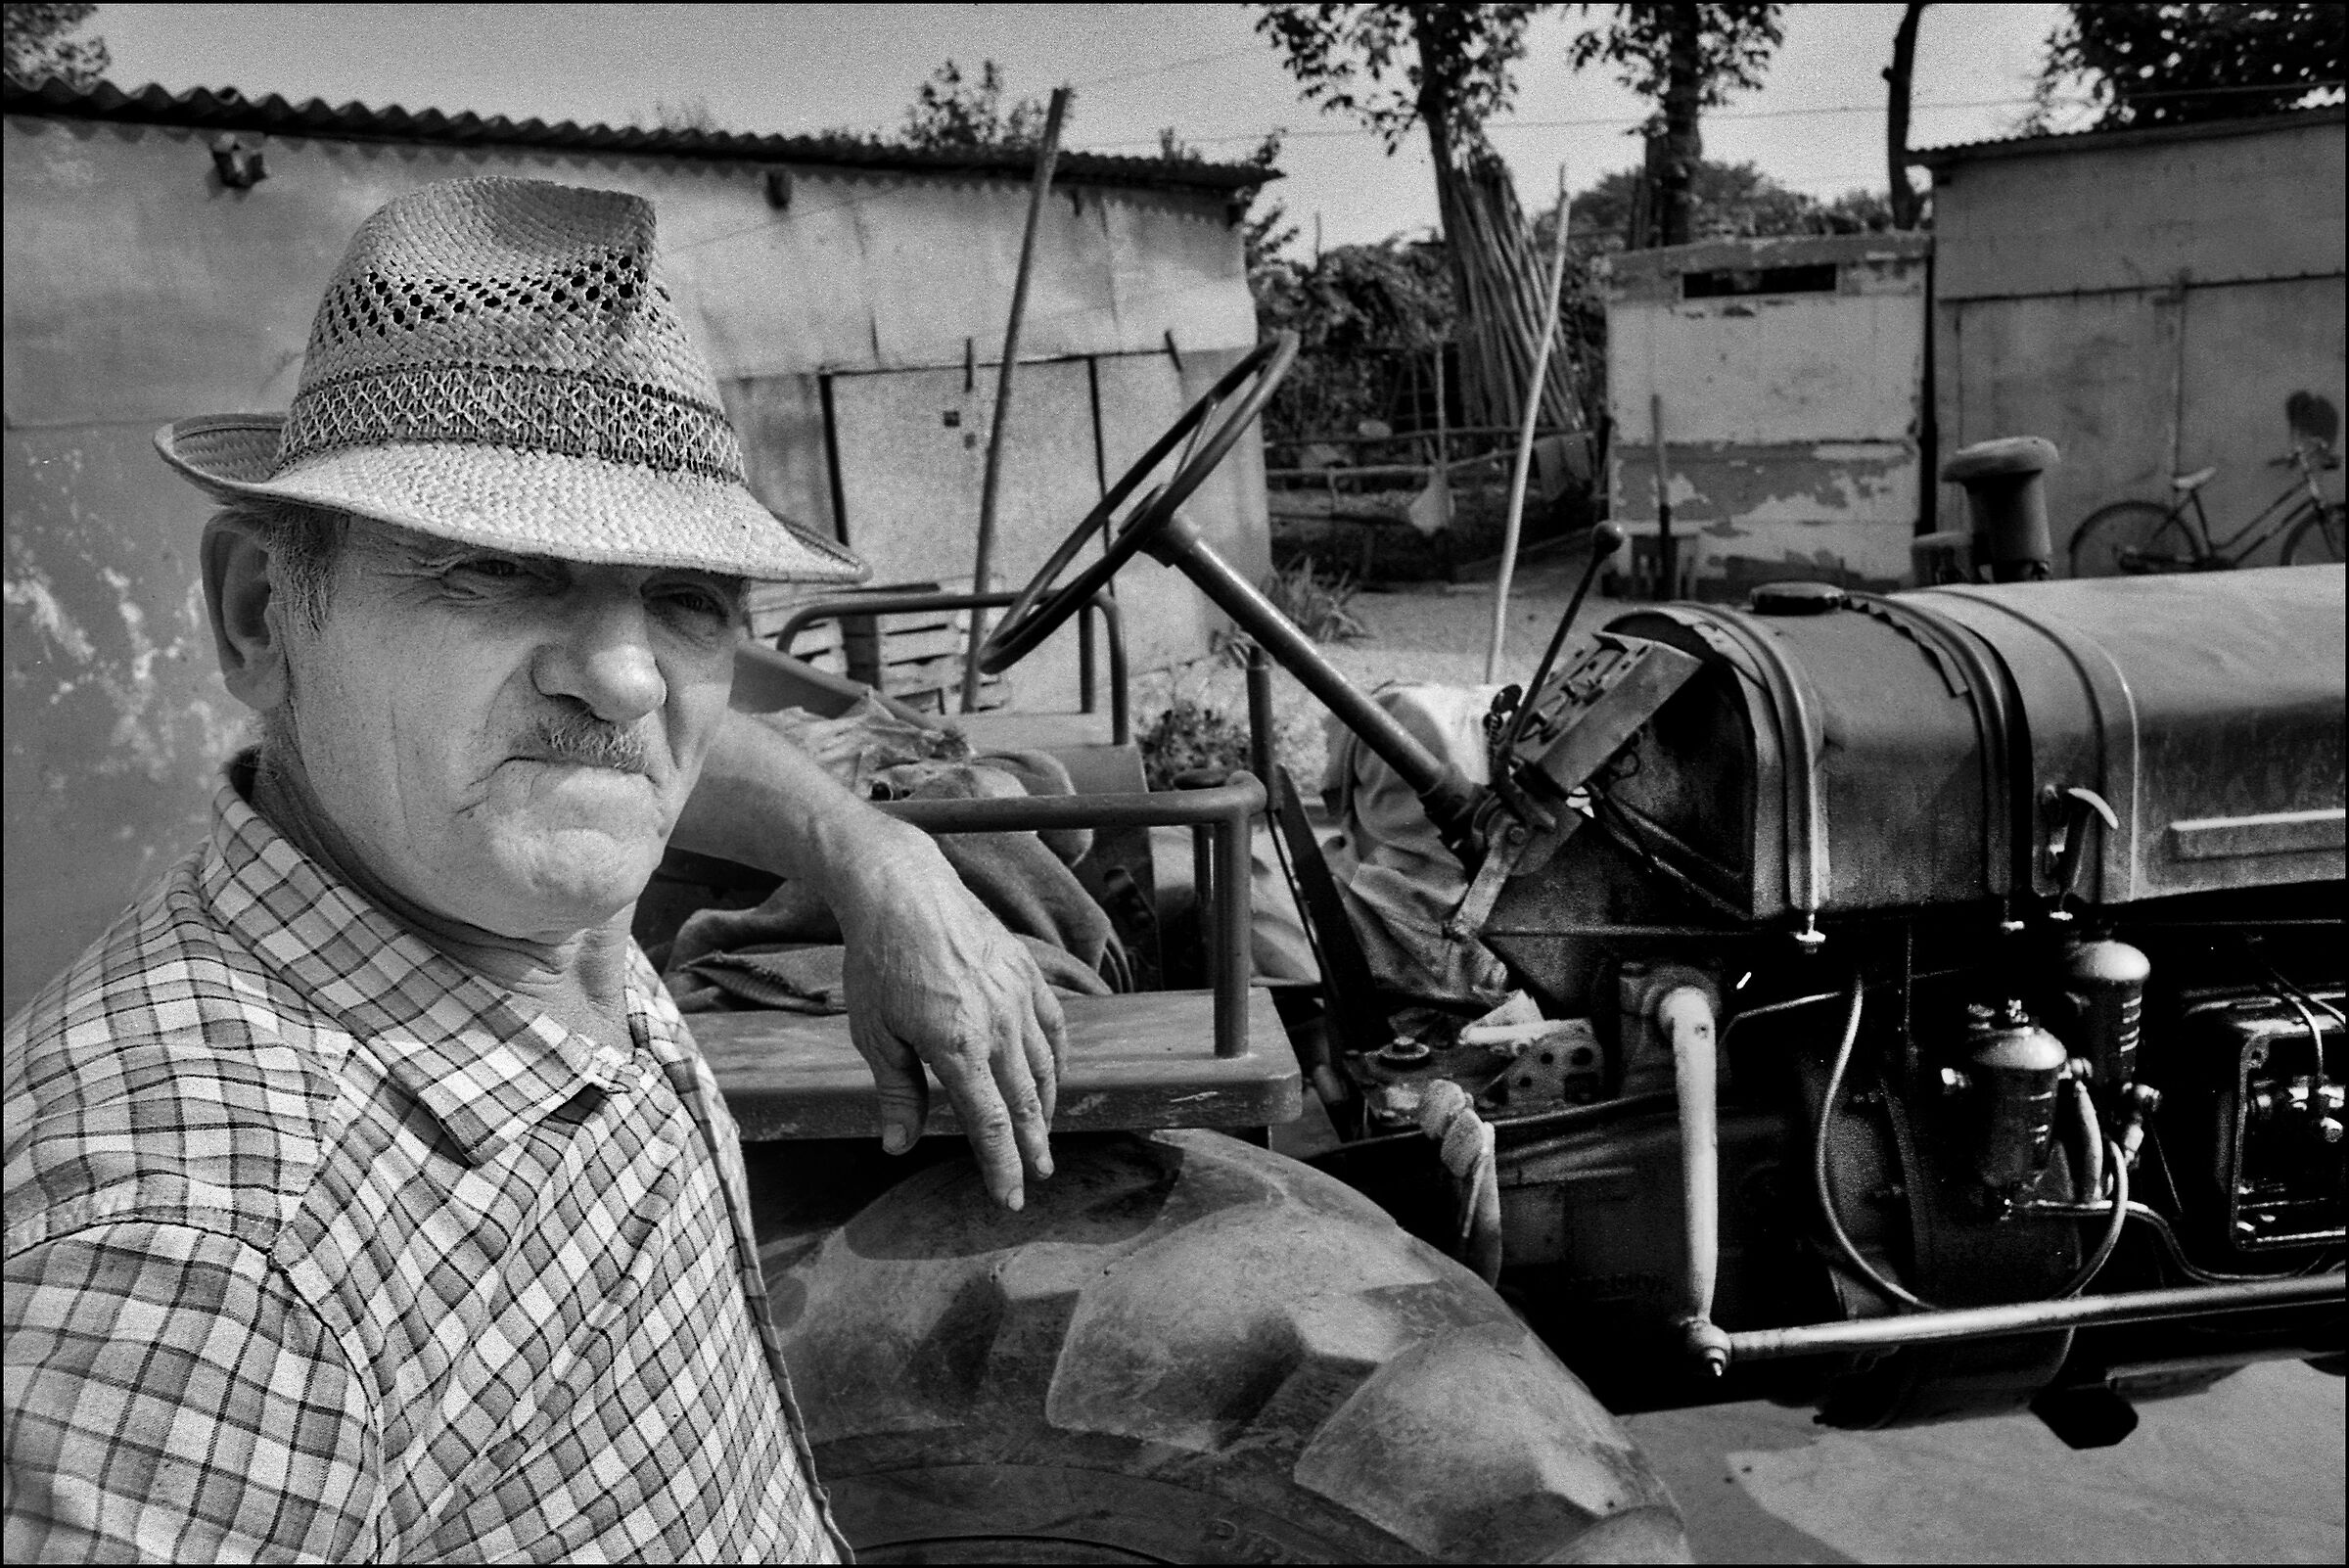 1985 Italy "the man of the tractor"...